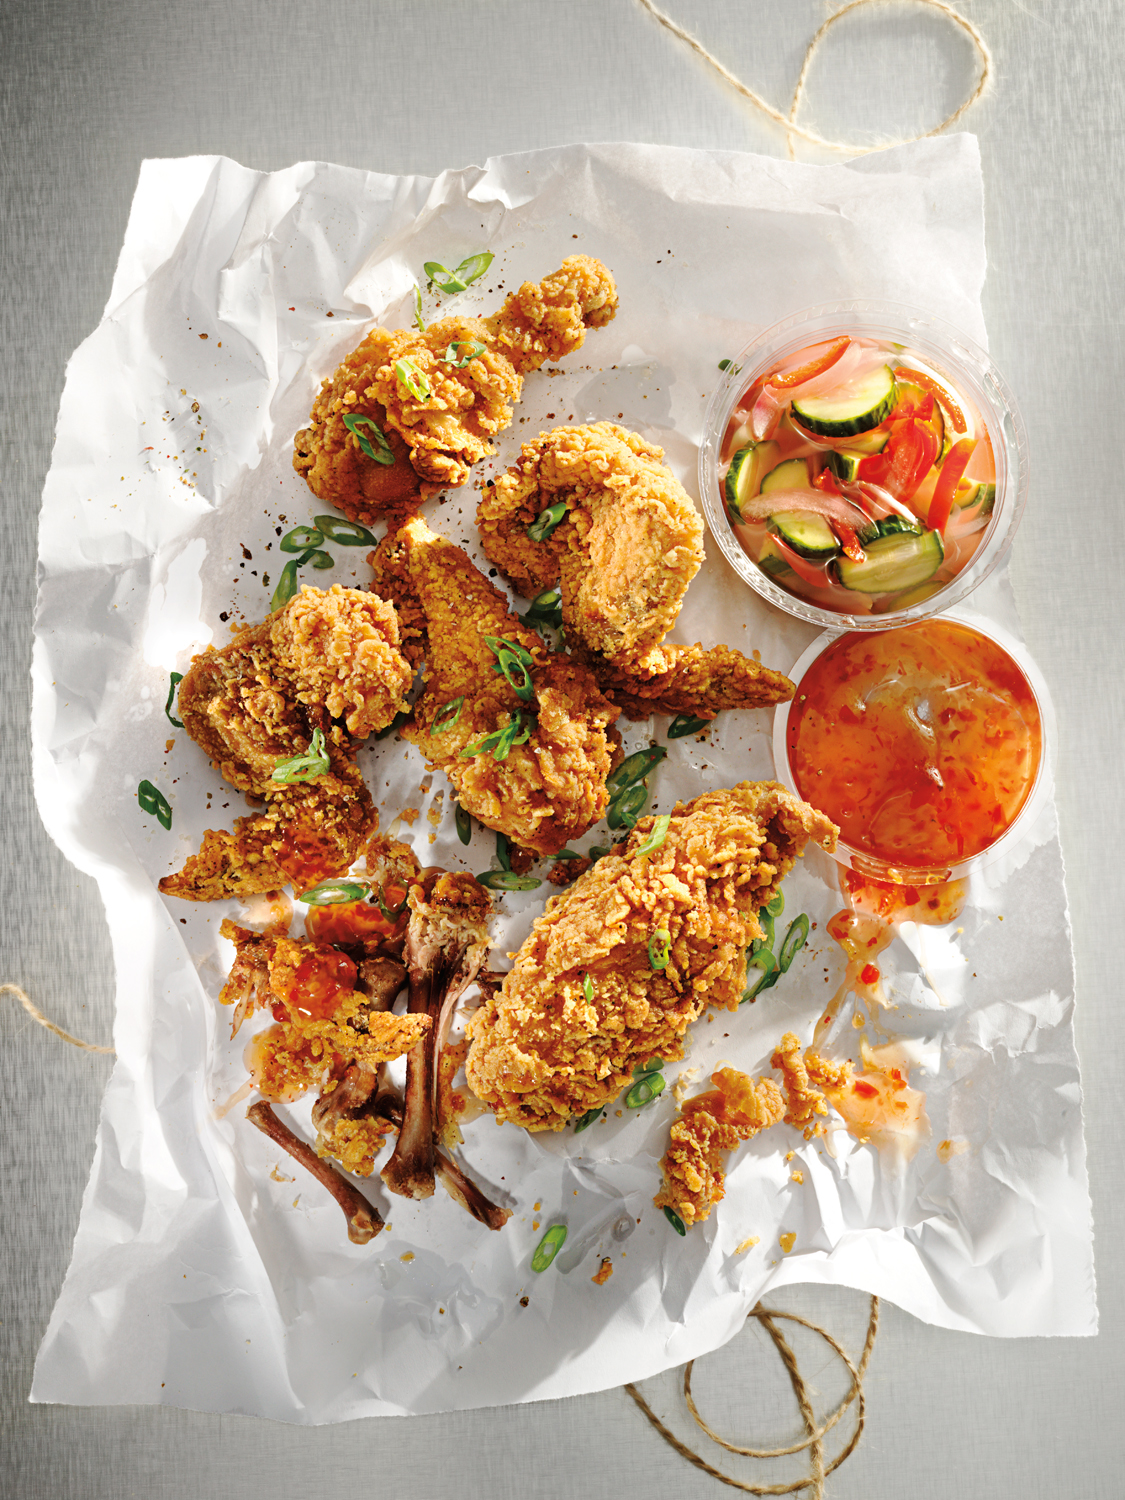 Spicy fried chicken pieces with Asian sauce on wax paper picnic lunch